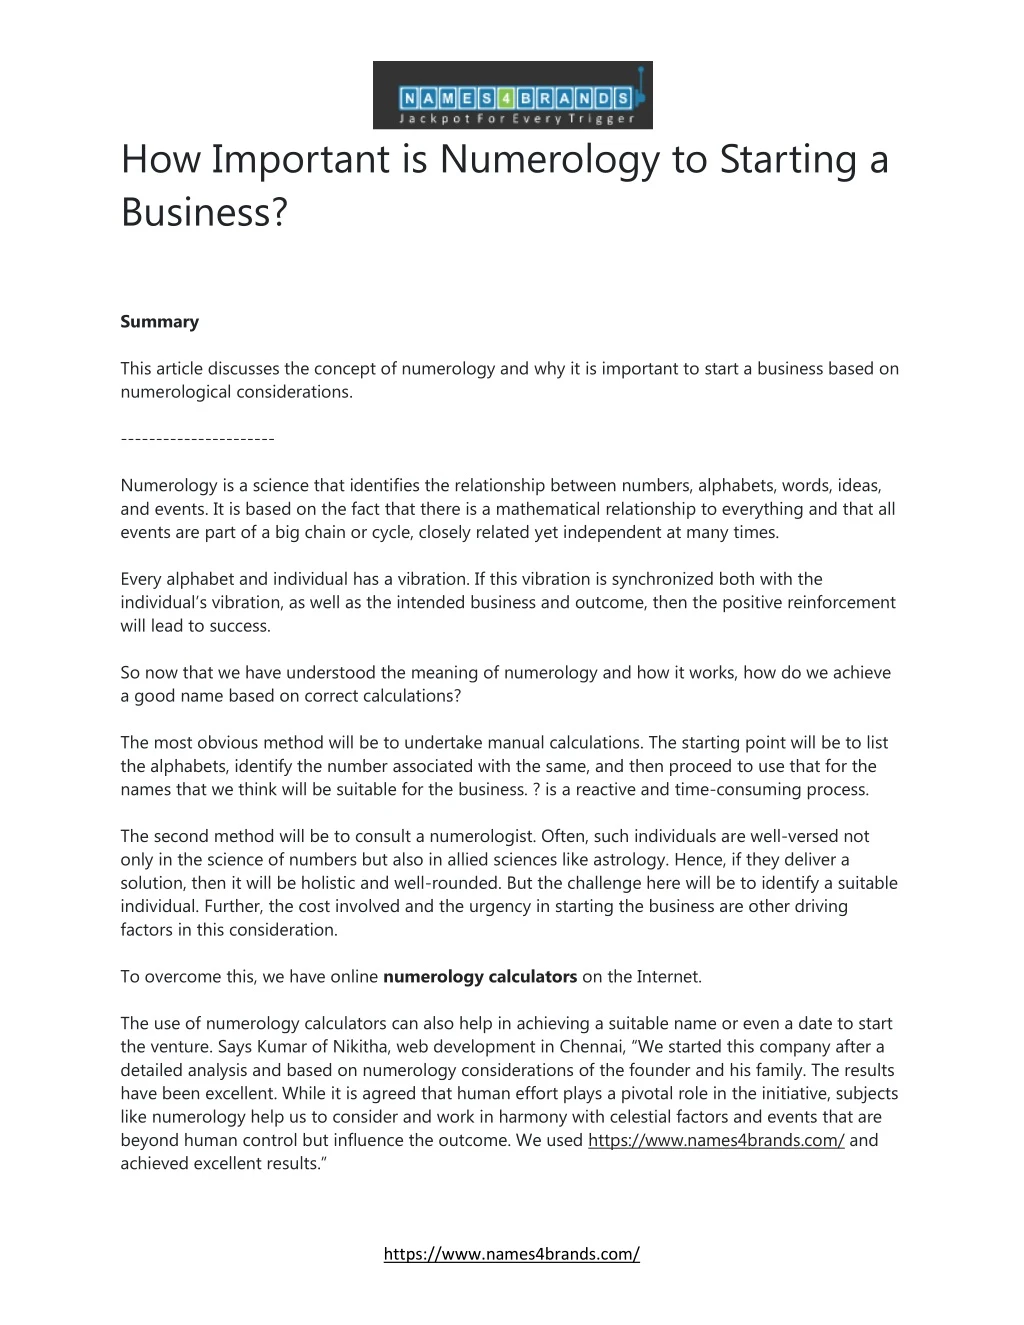 how important is numerology to starting a business